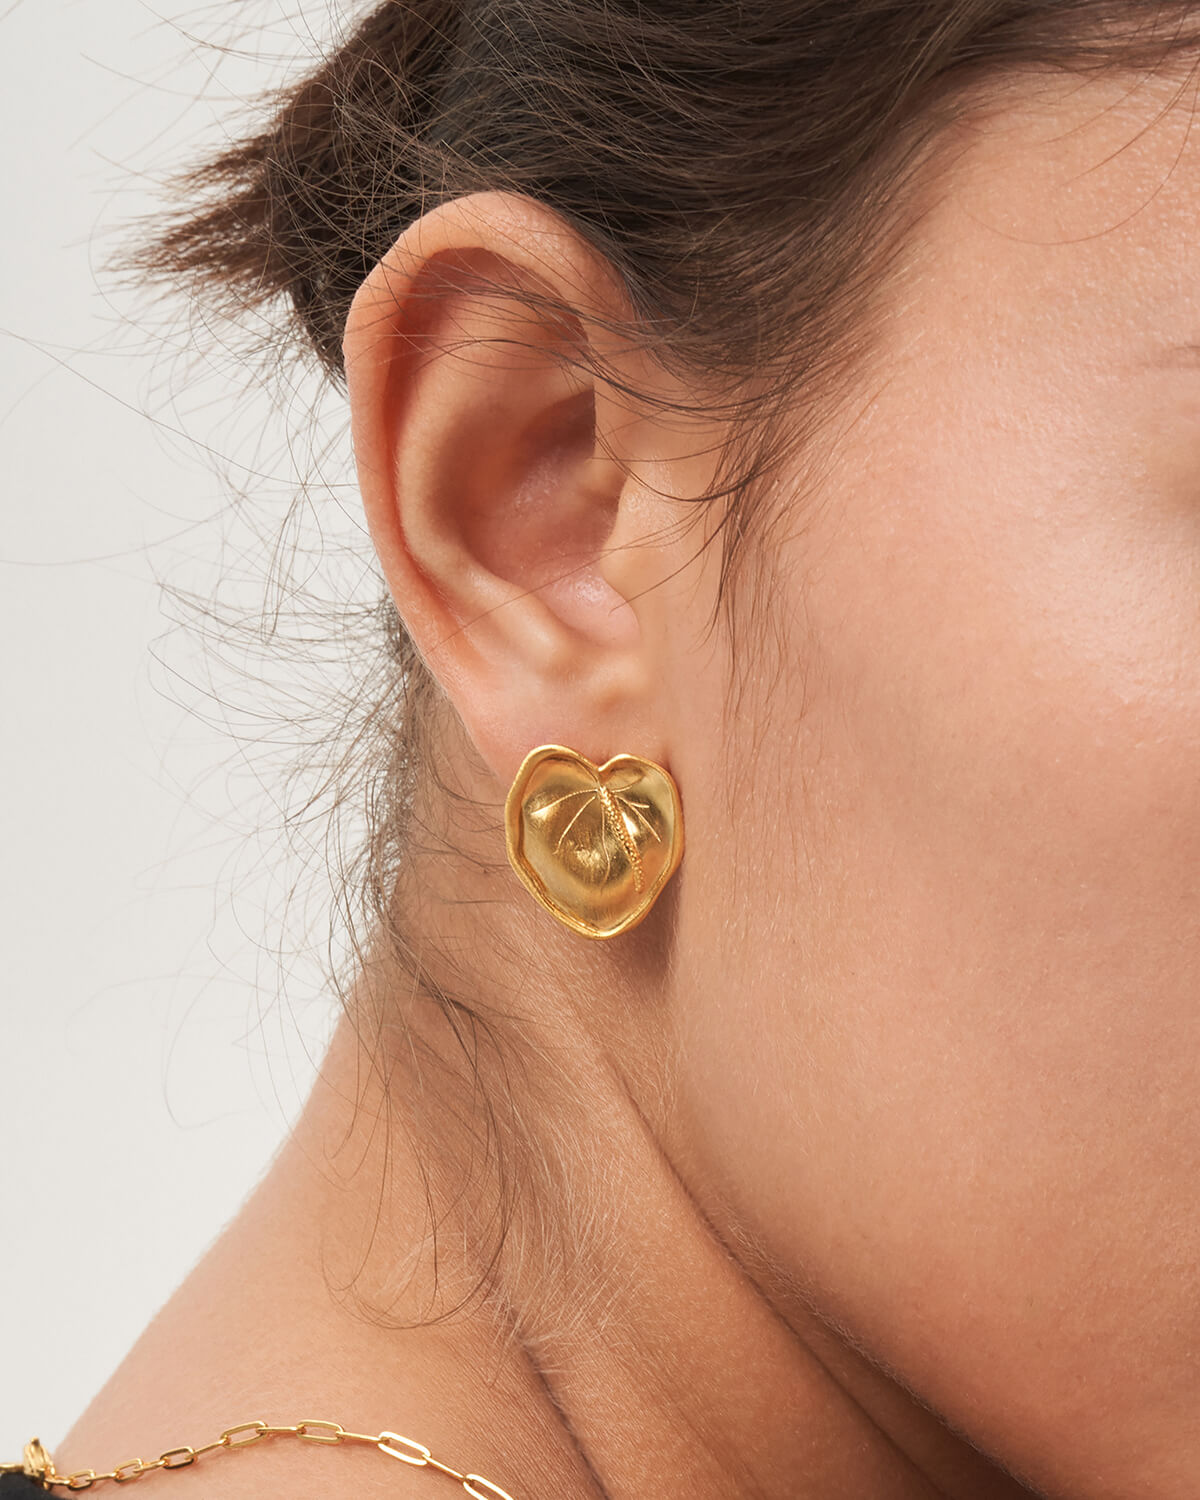 a close up of a person wearing a gold earring